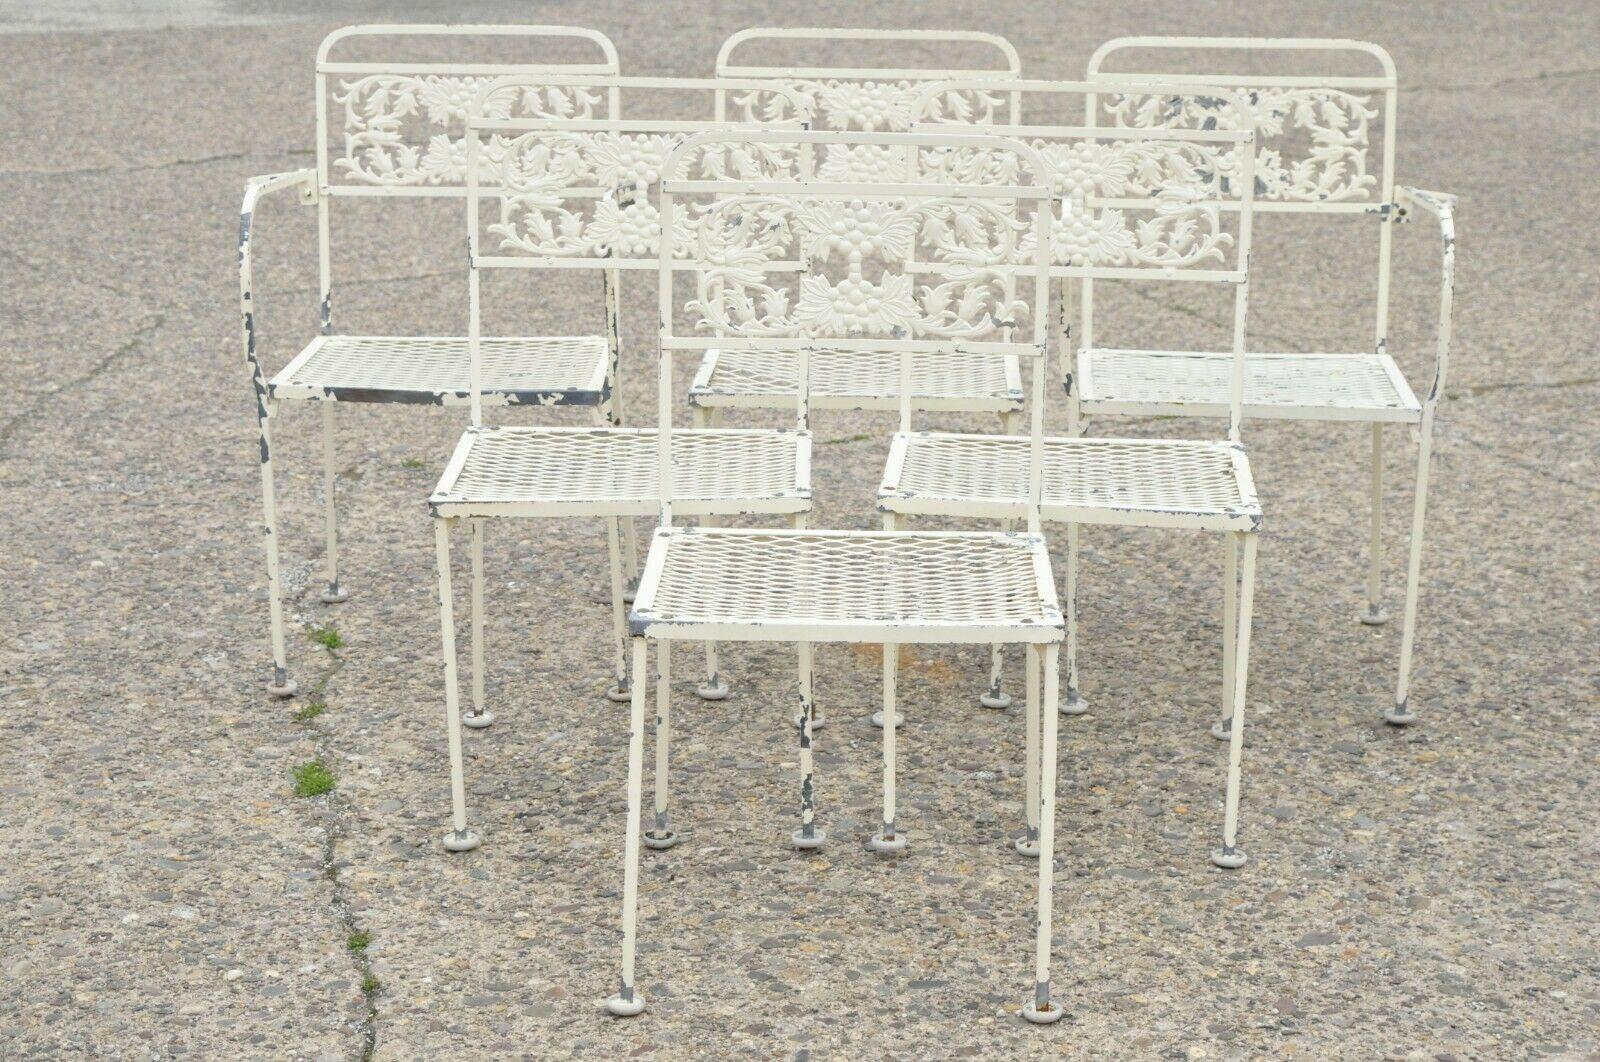 Vintage wrought iron grape leaf garden patio dining set table 6 chairs - 7 Pc Set. Item features (2) armchairs, (4) side chairs, (1) glass top table, floral scroll work design, wrought iron construction, very nice vintage set, great style and form.